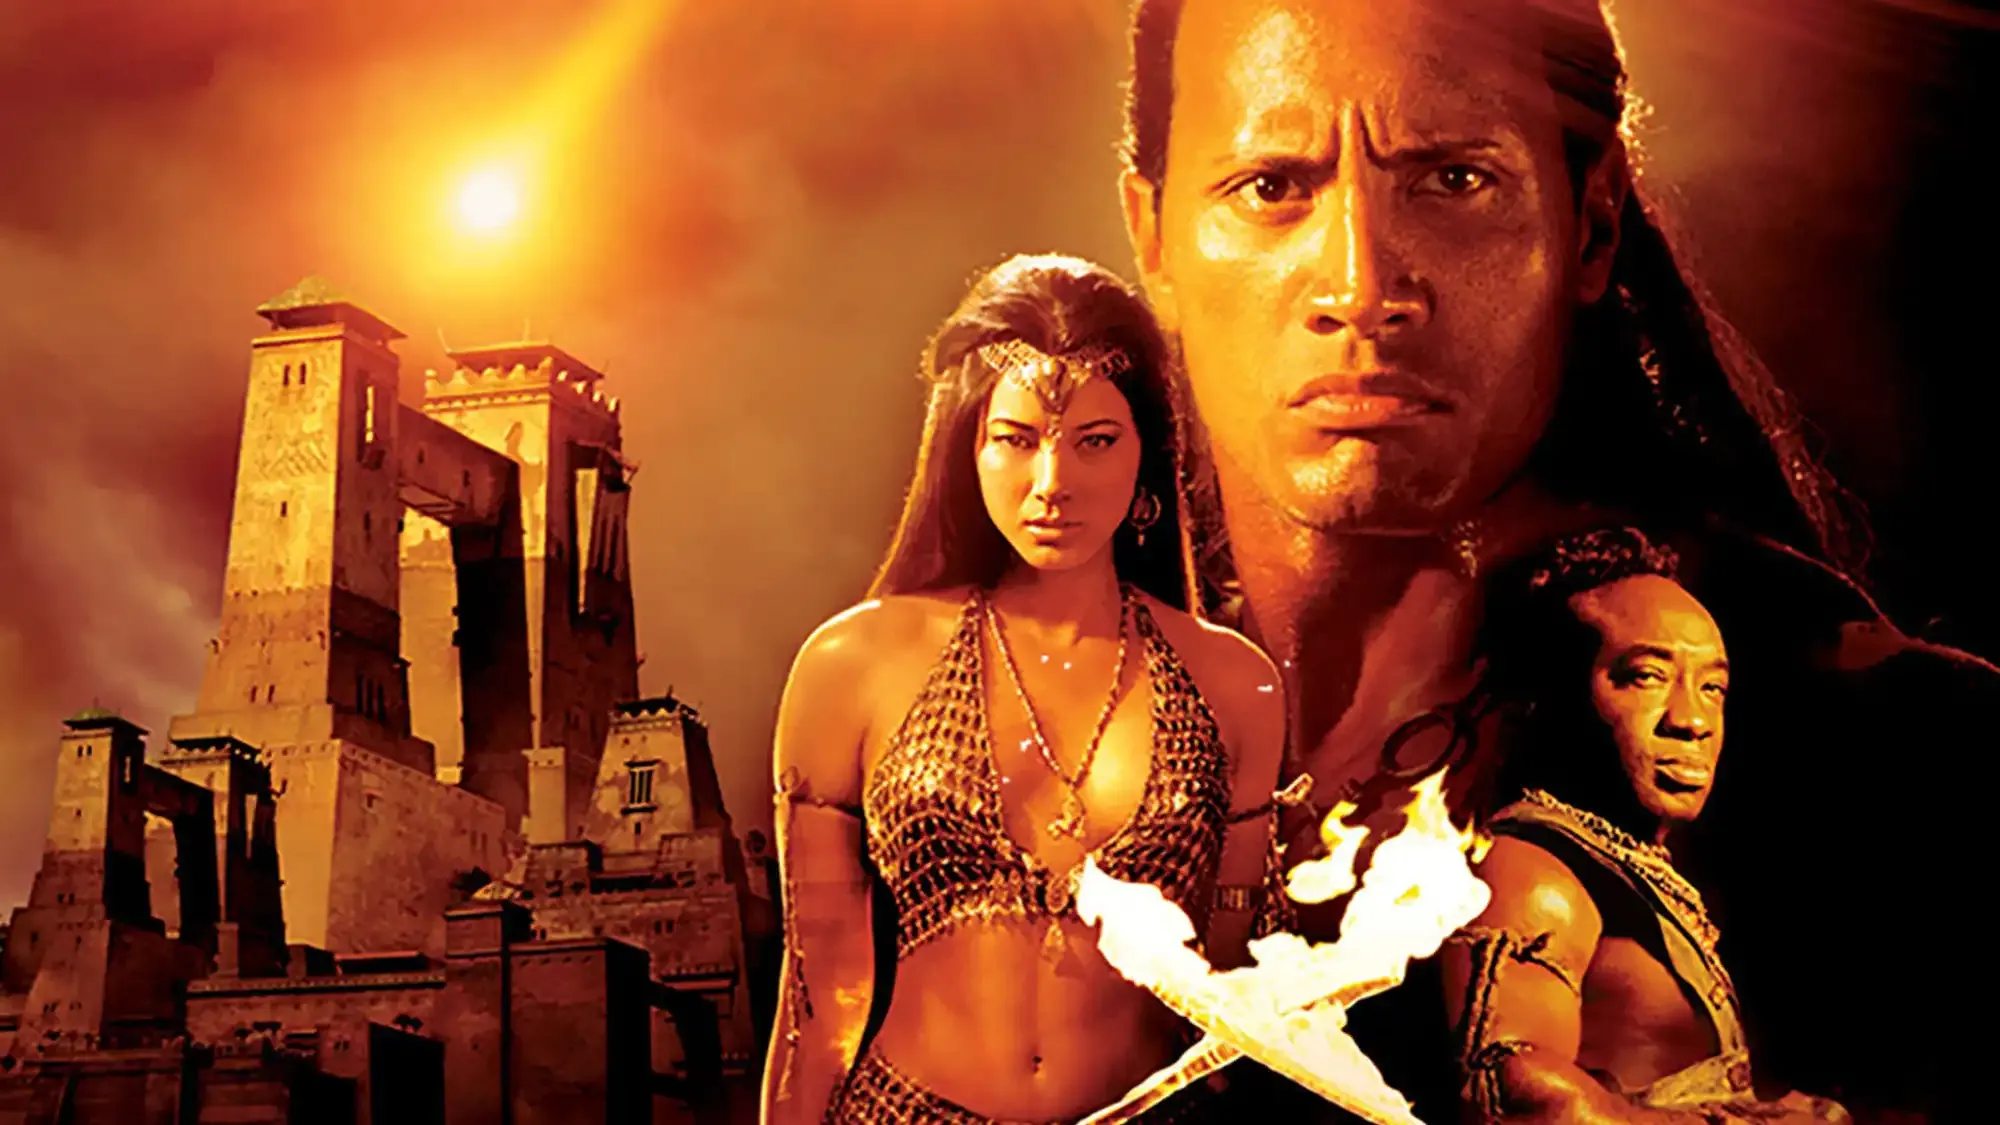 The Scorpion King movie review